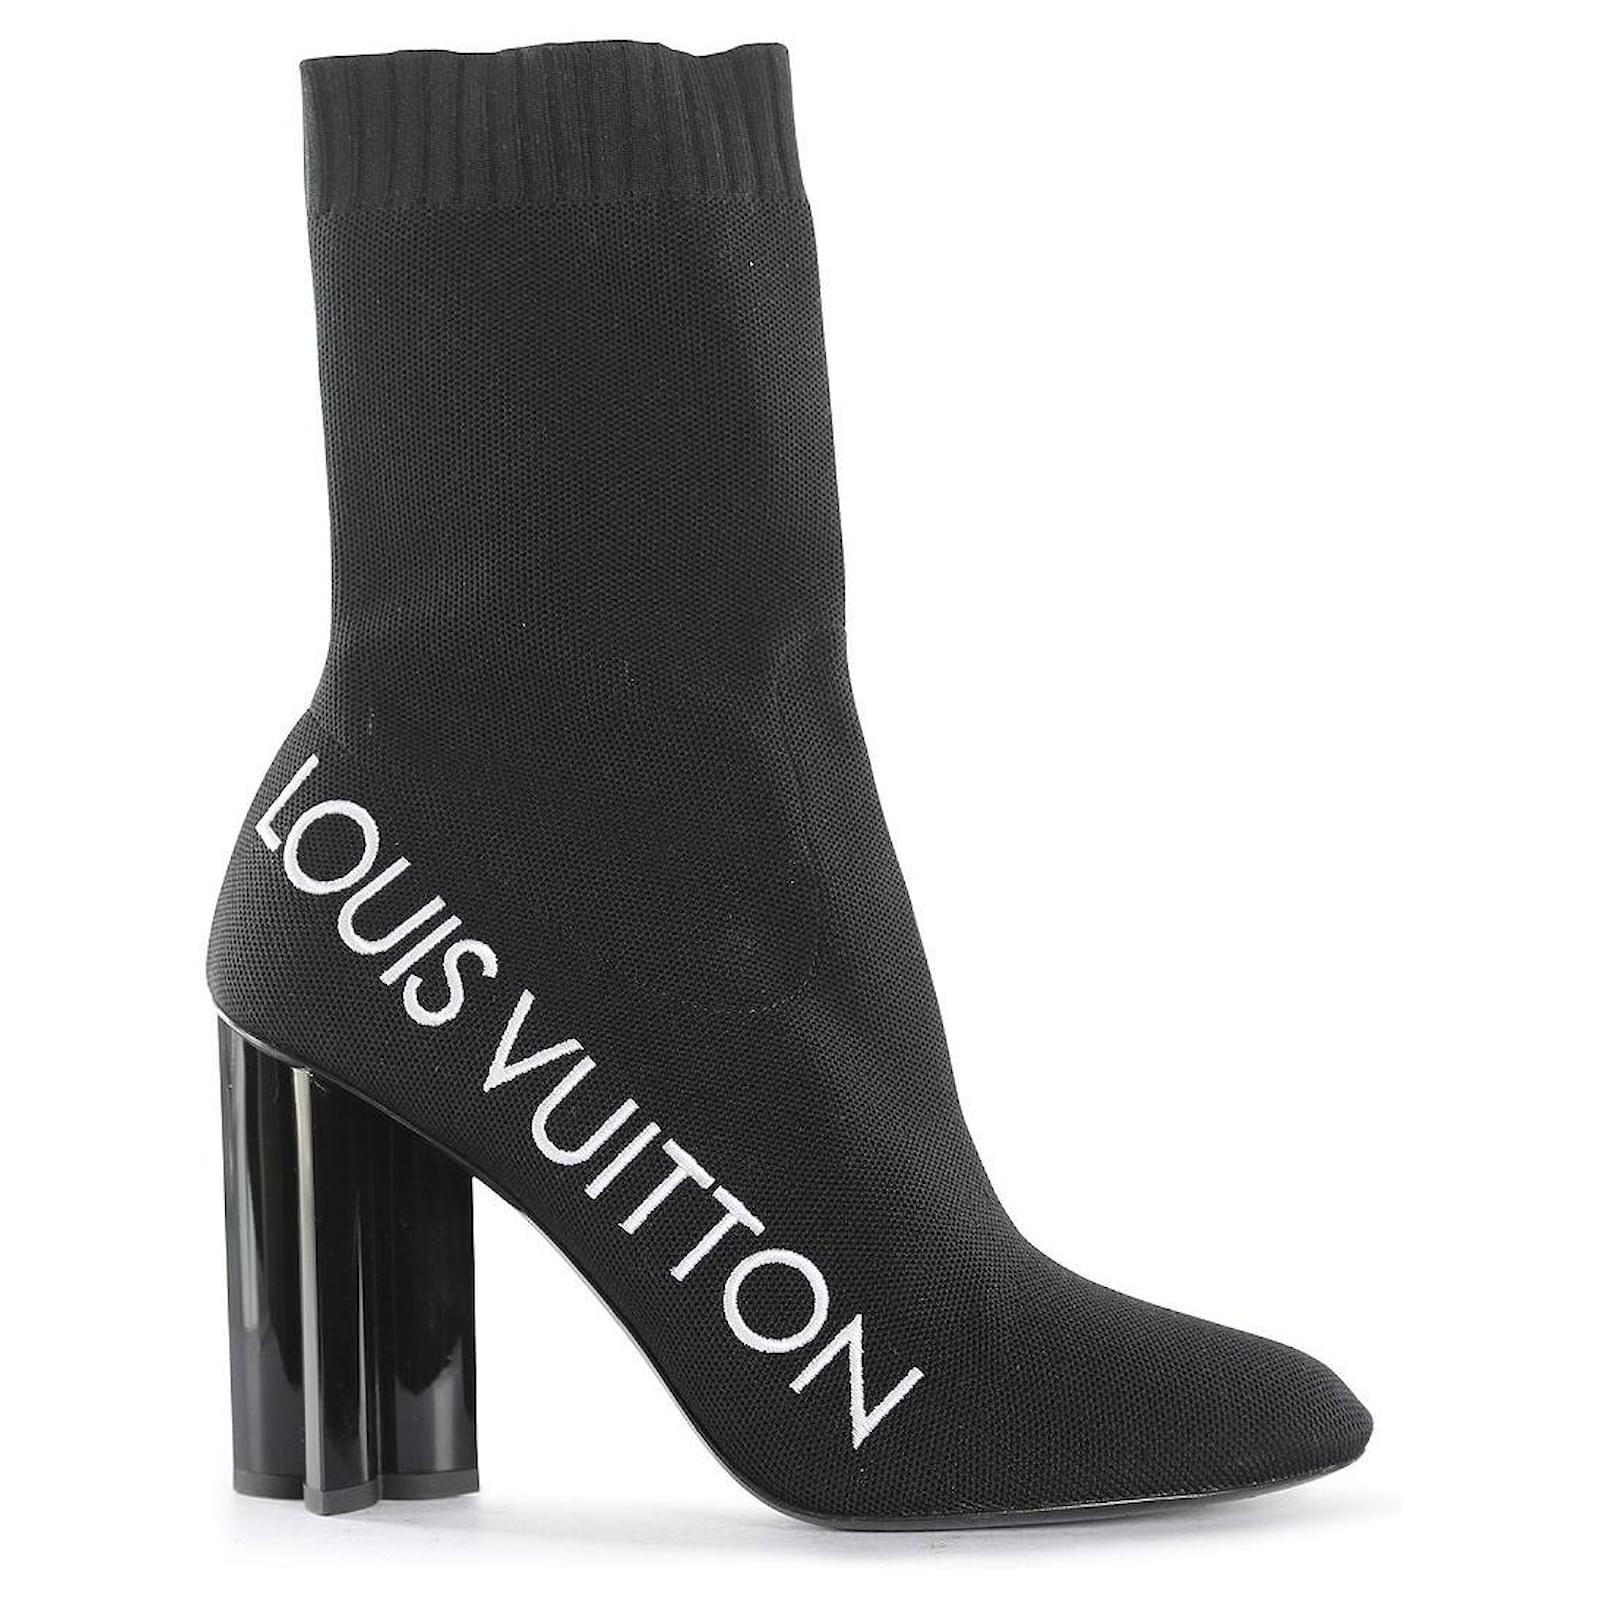 Louis Vuitton Black Stretch Fabric Silhouette Ankle Boots